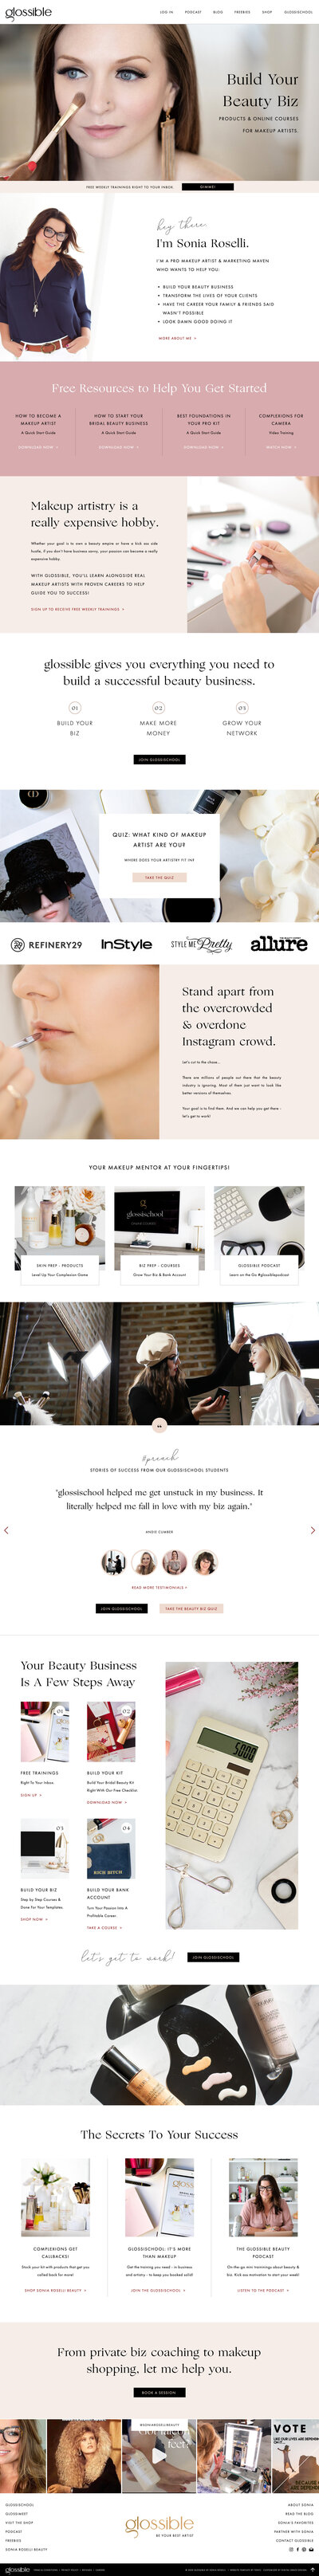 Showit template customization for Glossible, education for makeup artists